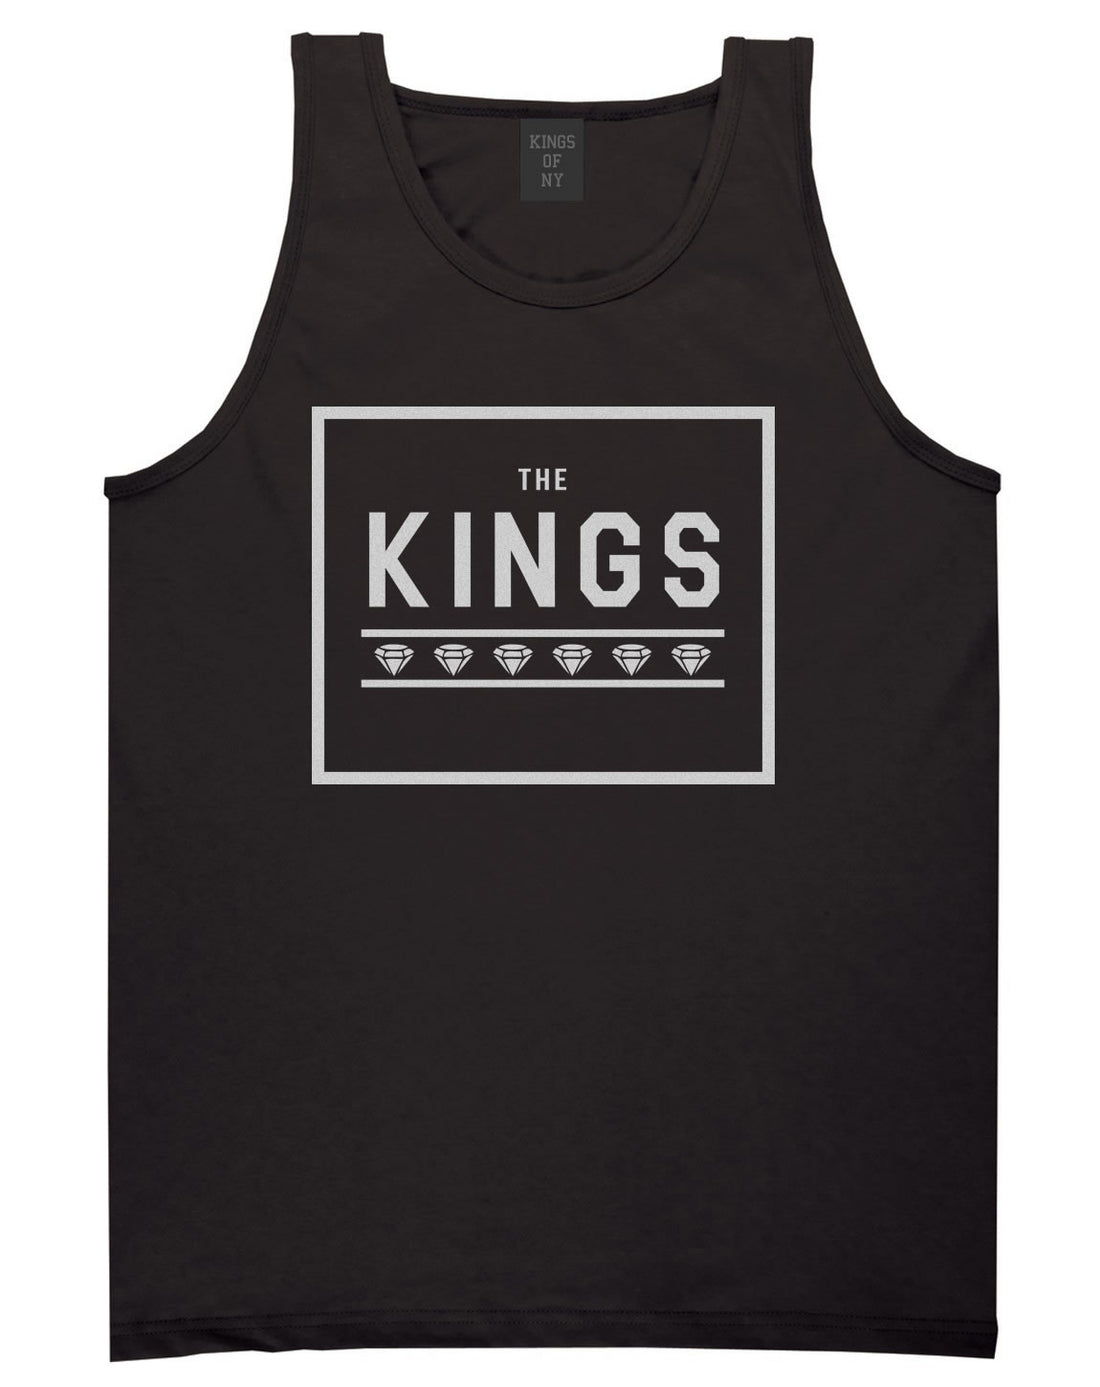 The Kings Diamonds Tank Top in Black by Kings Of NY